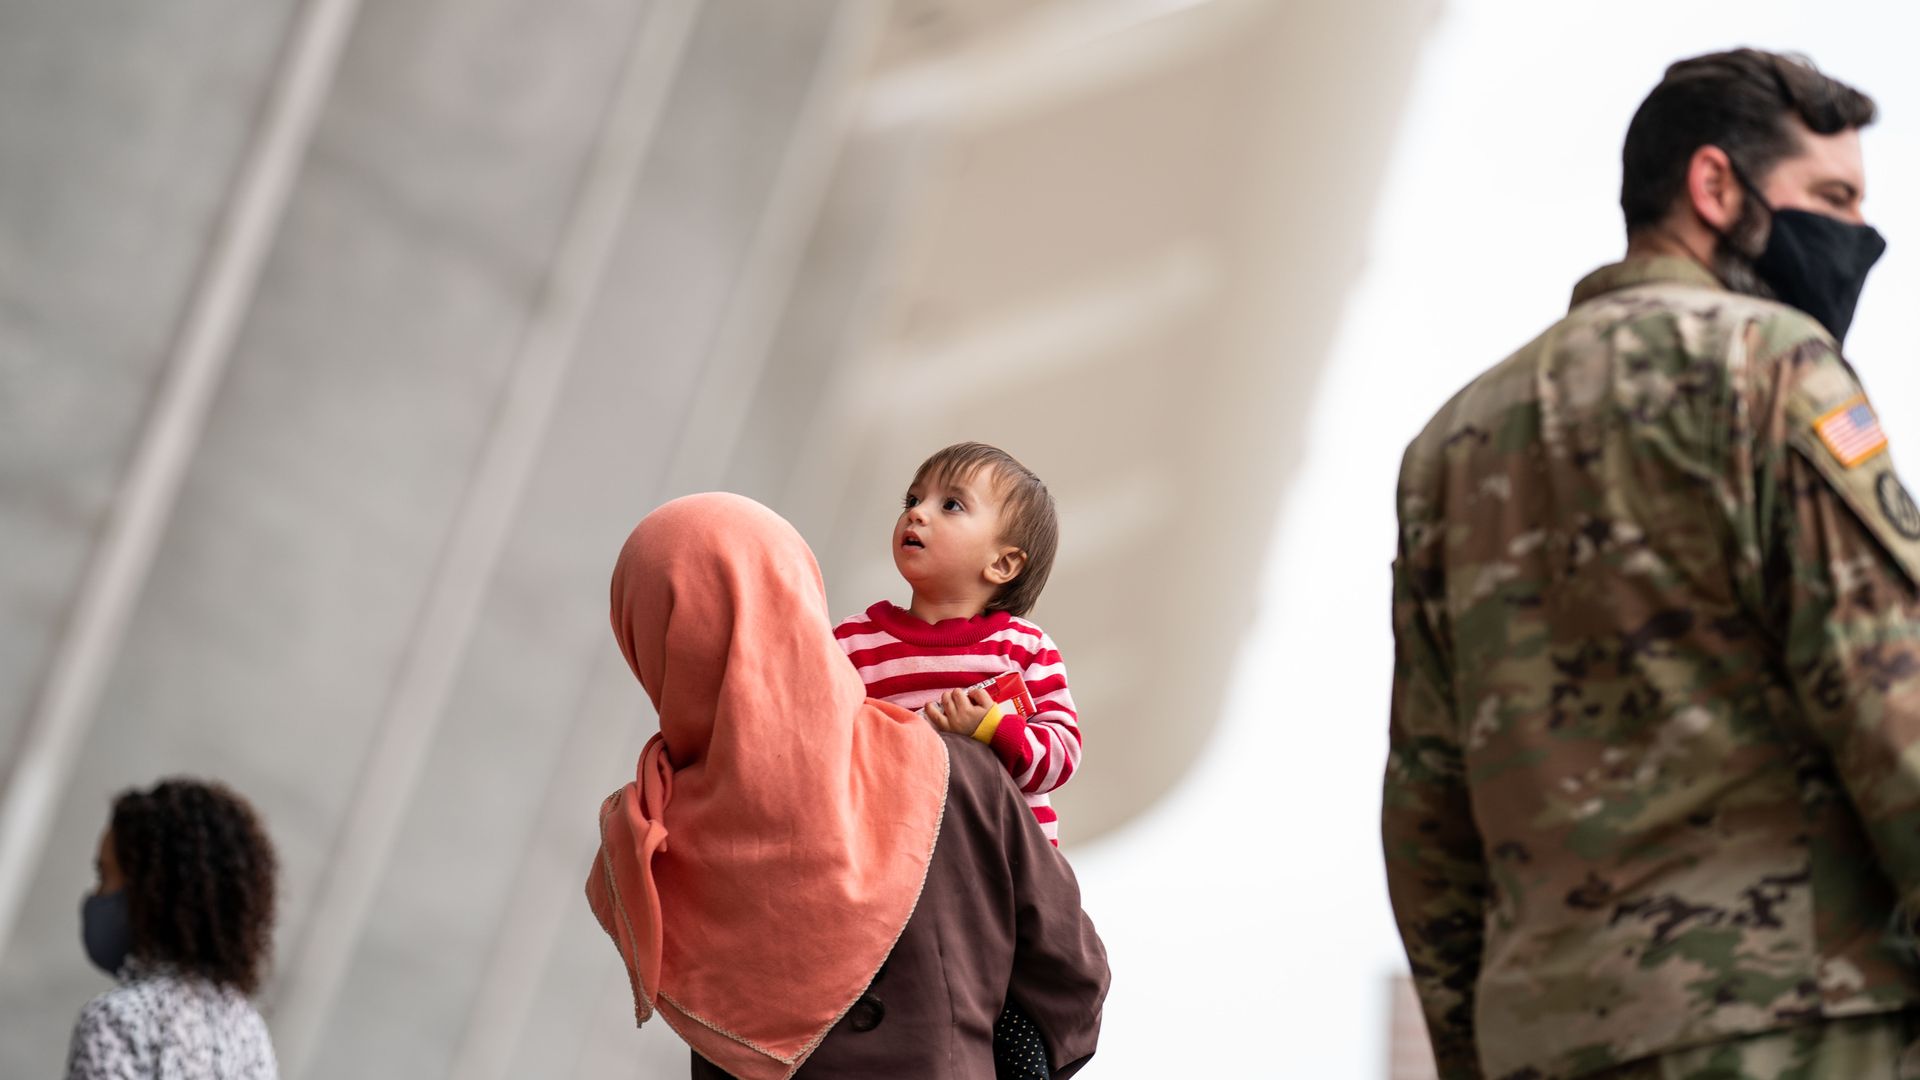 A Afghan woman holds a toddler outside Dulles International Airport.